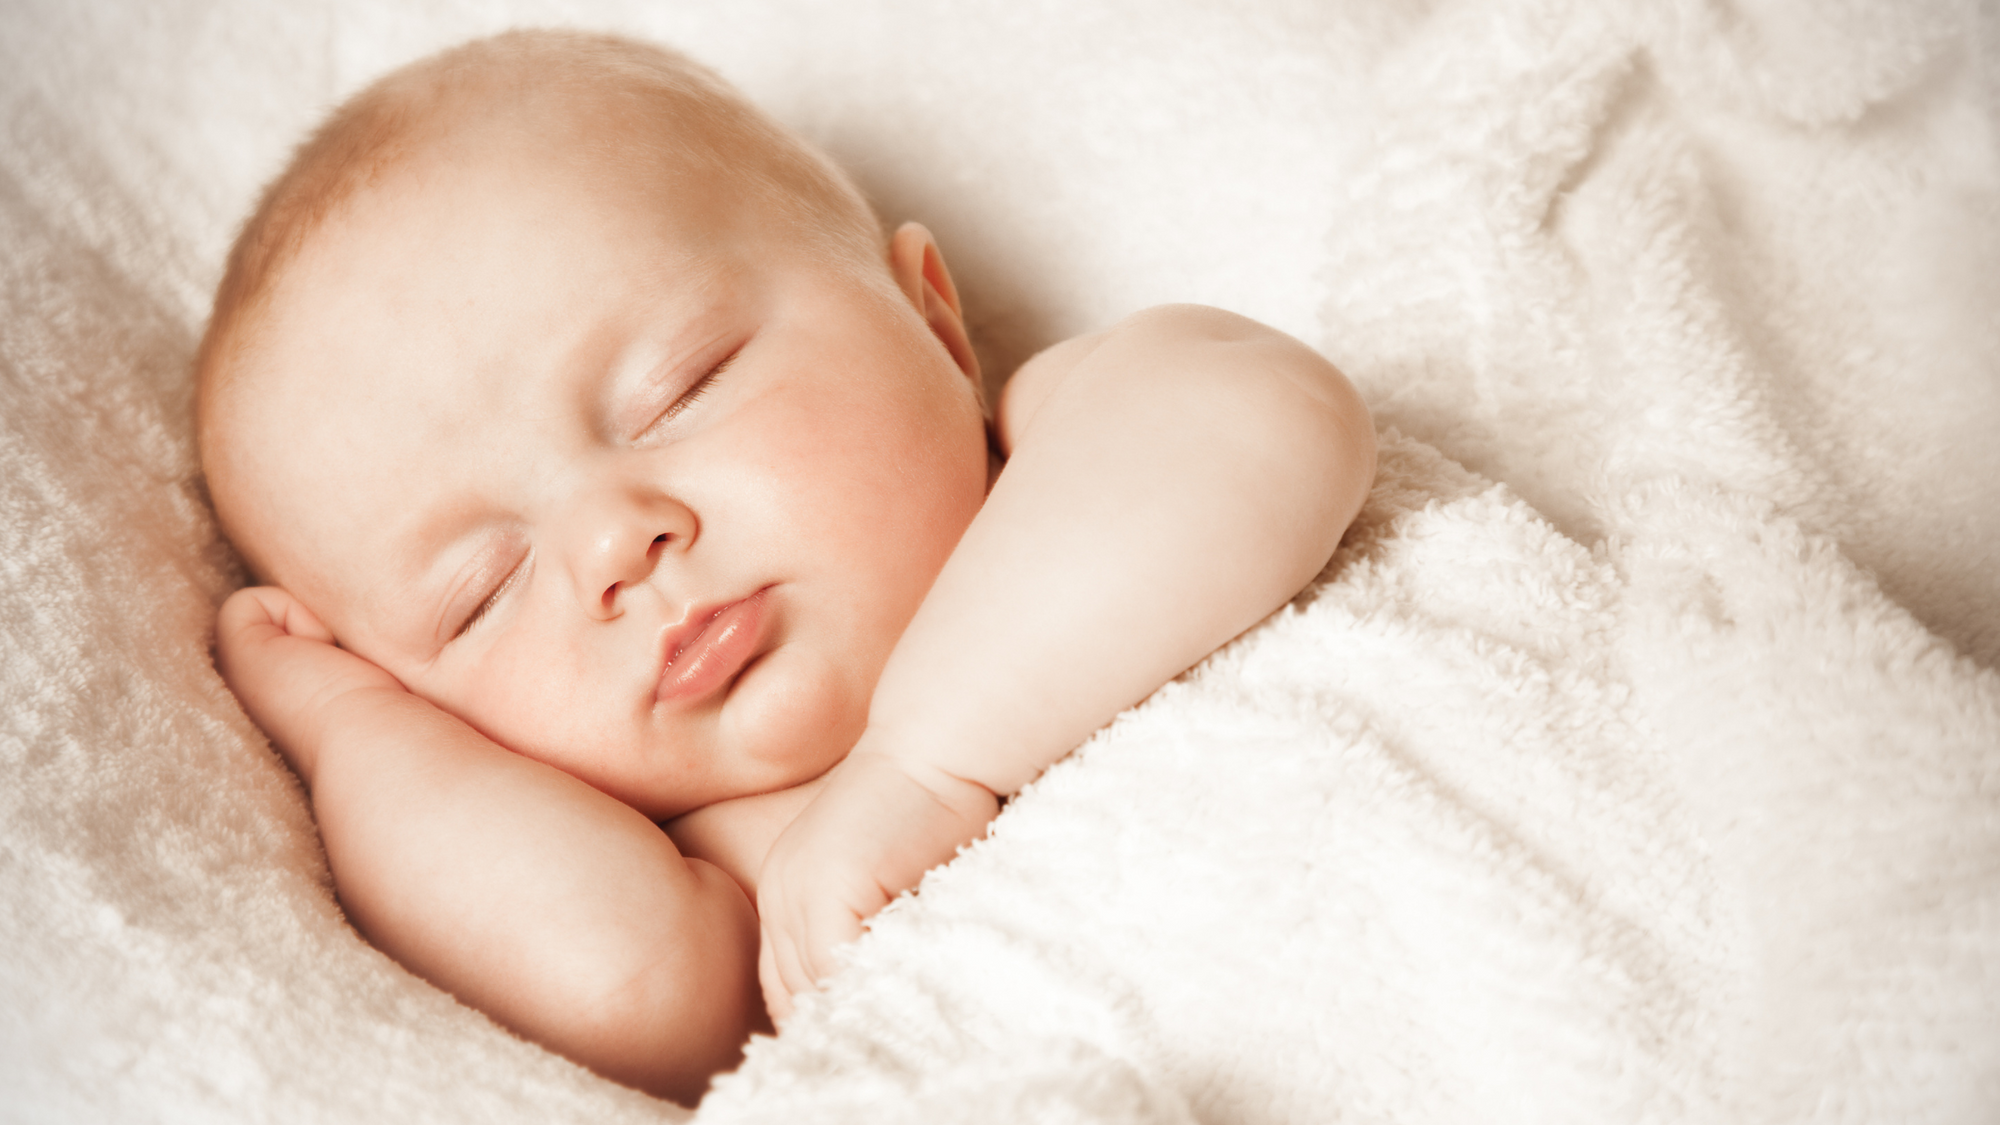 Why Choose Bamboo Bedding for Your Baby? Helping You and Your Little One Sleep Better